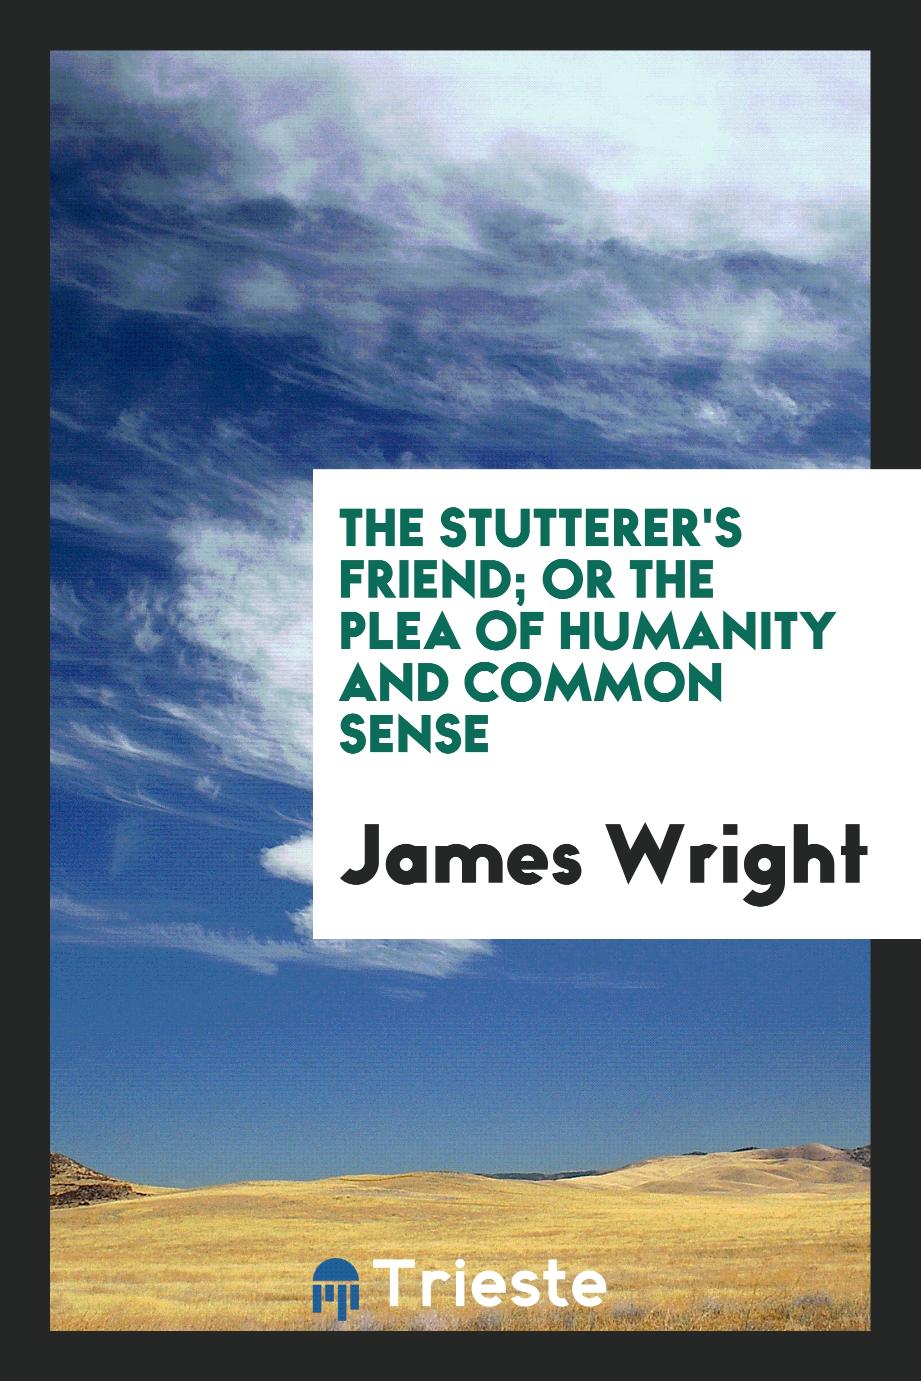 The stutterer's friend; or The plea of humanity and common sense